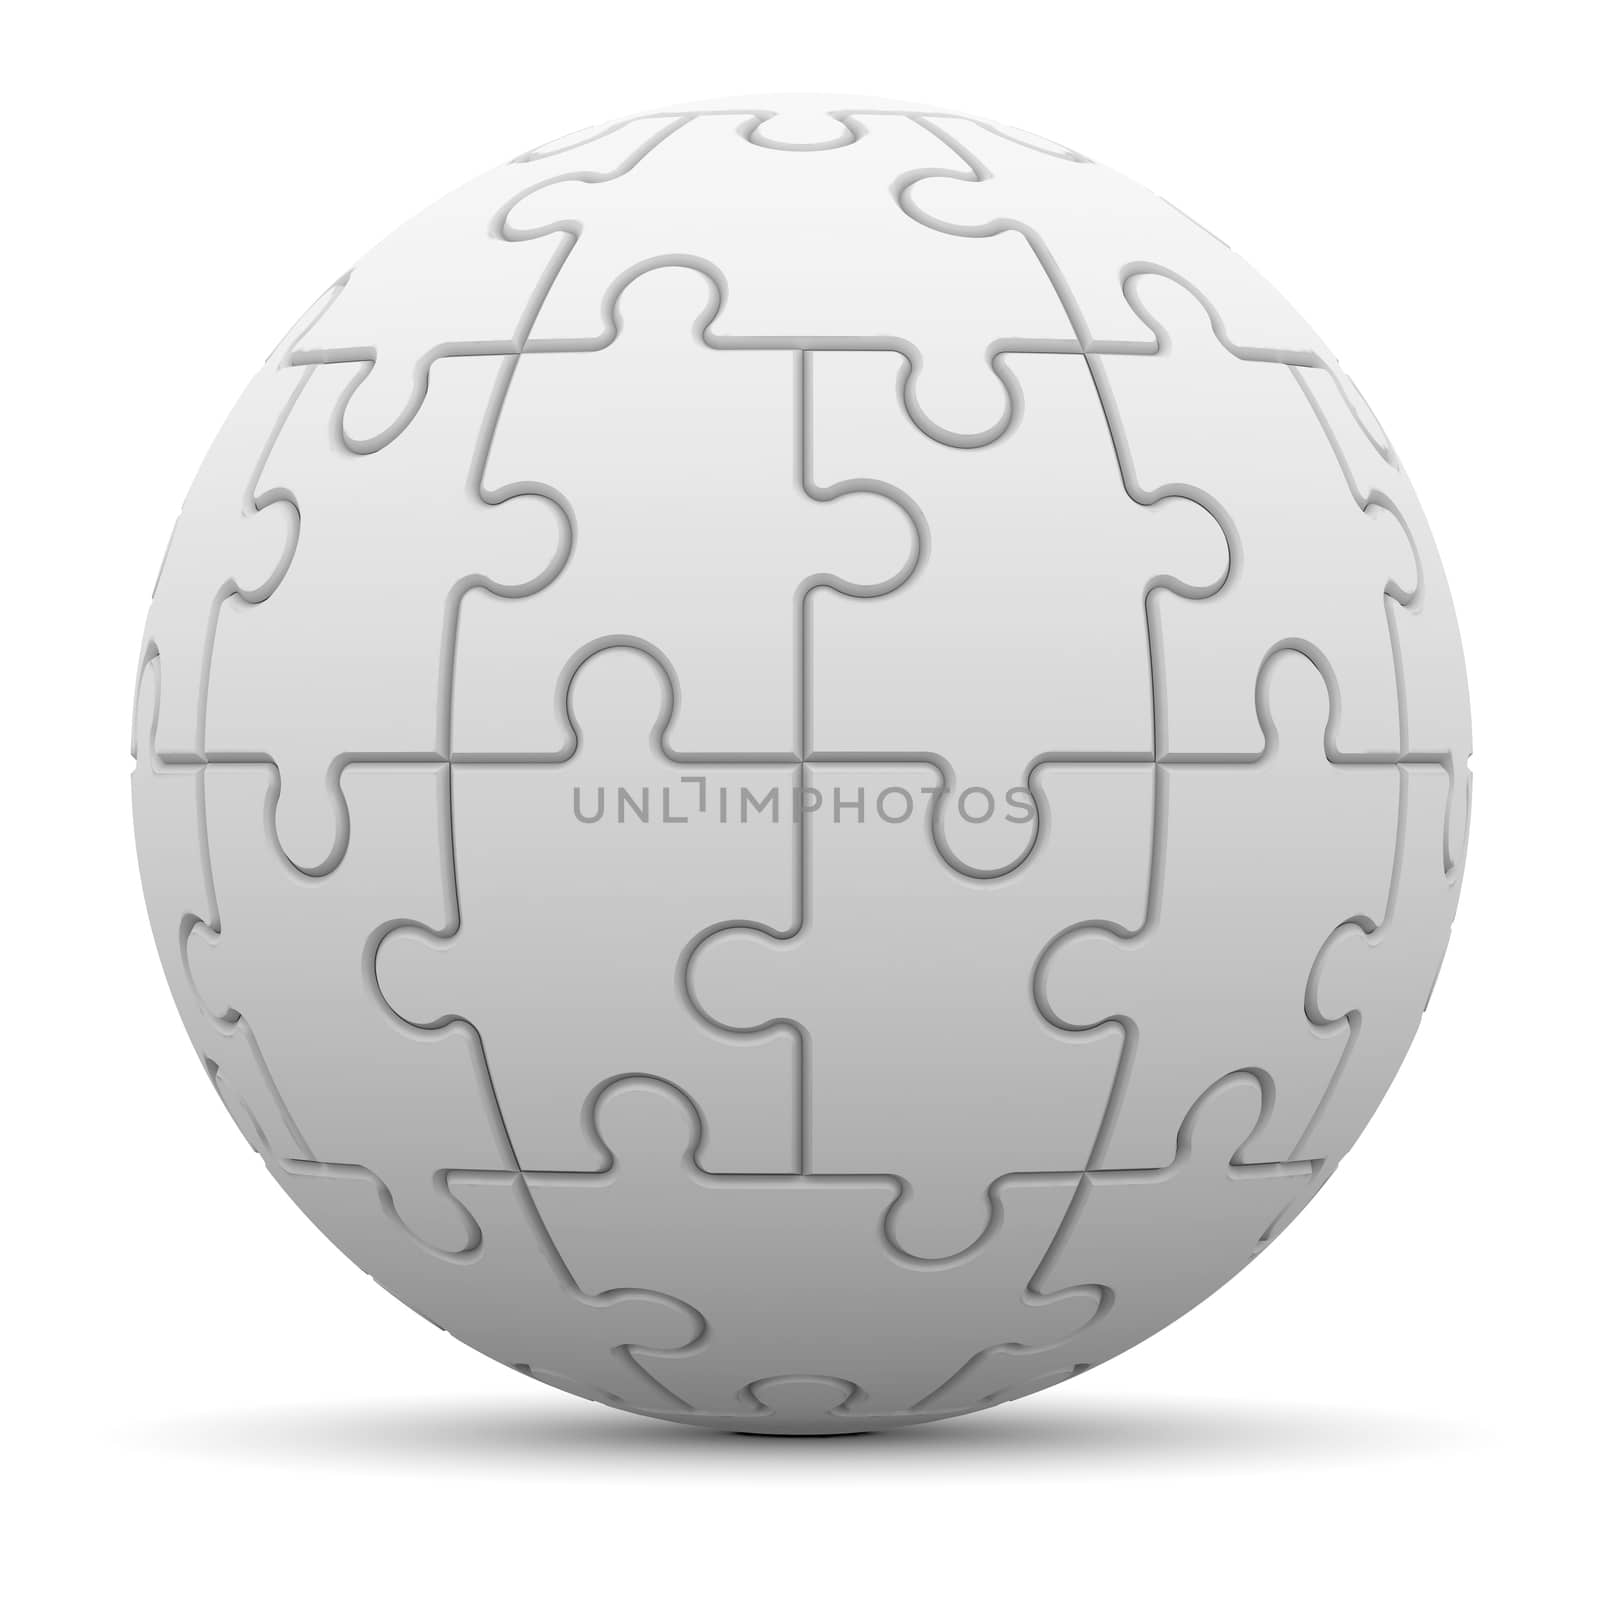 Sphere consisting of puzzles by cherezoff